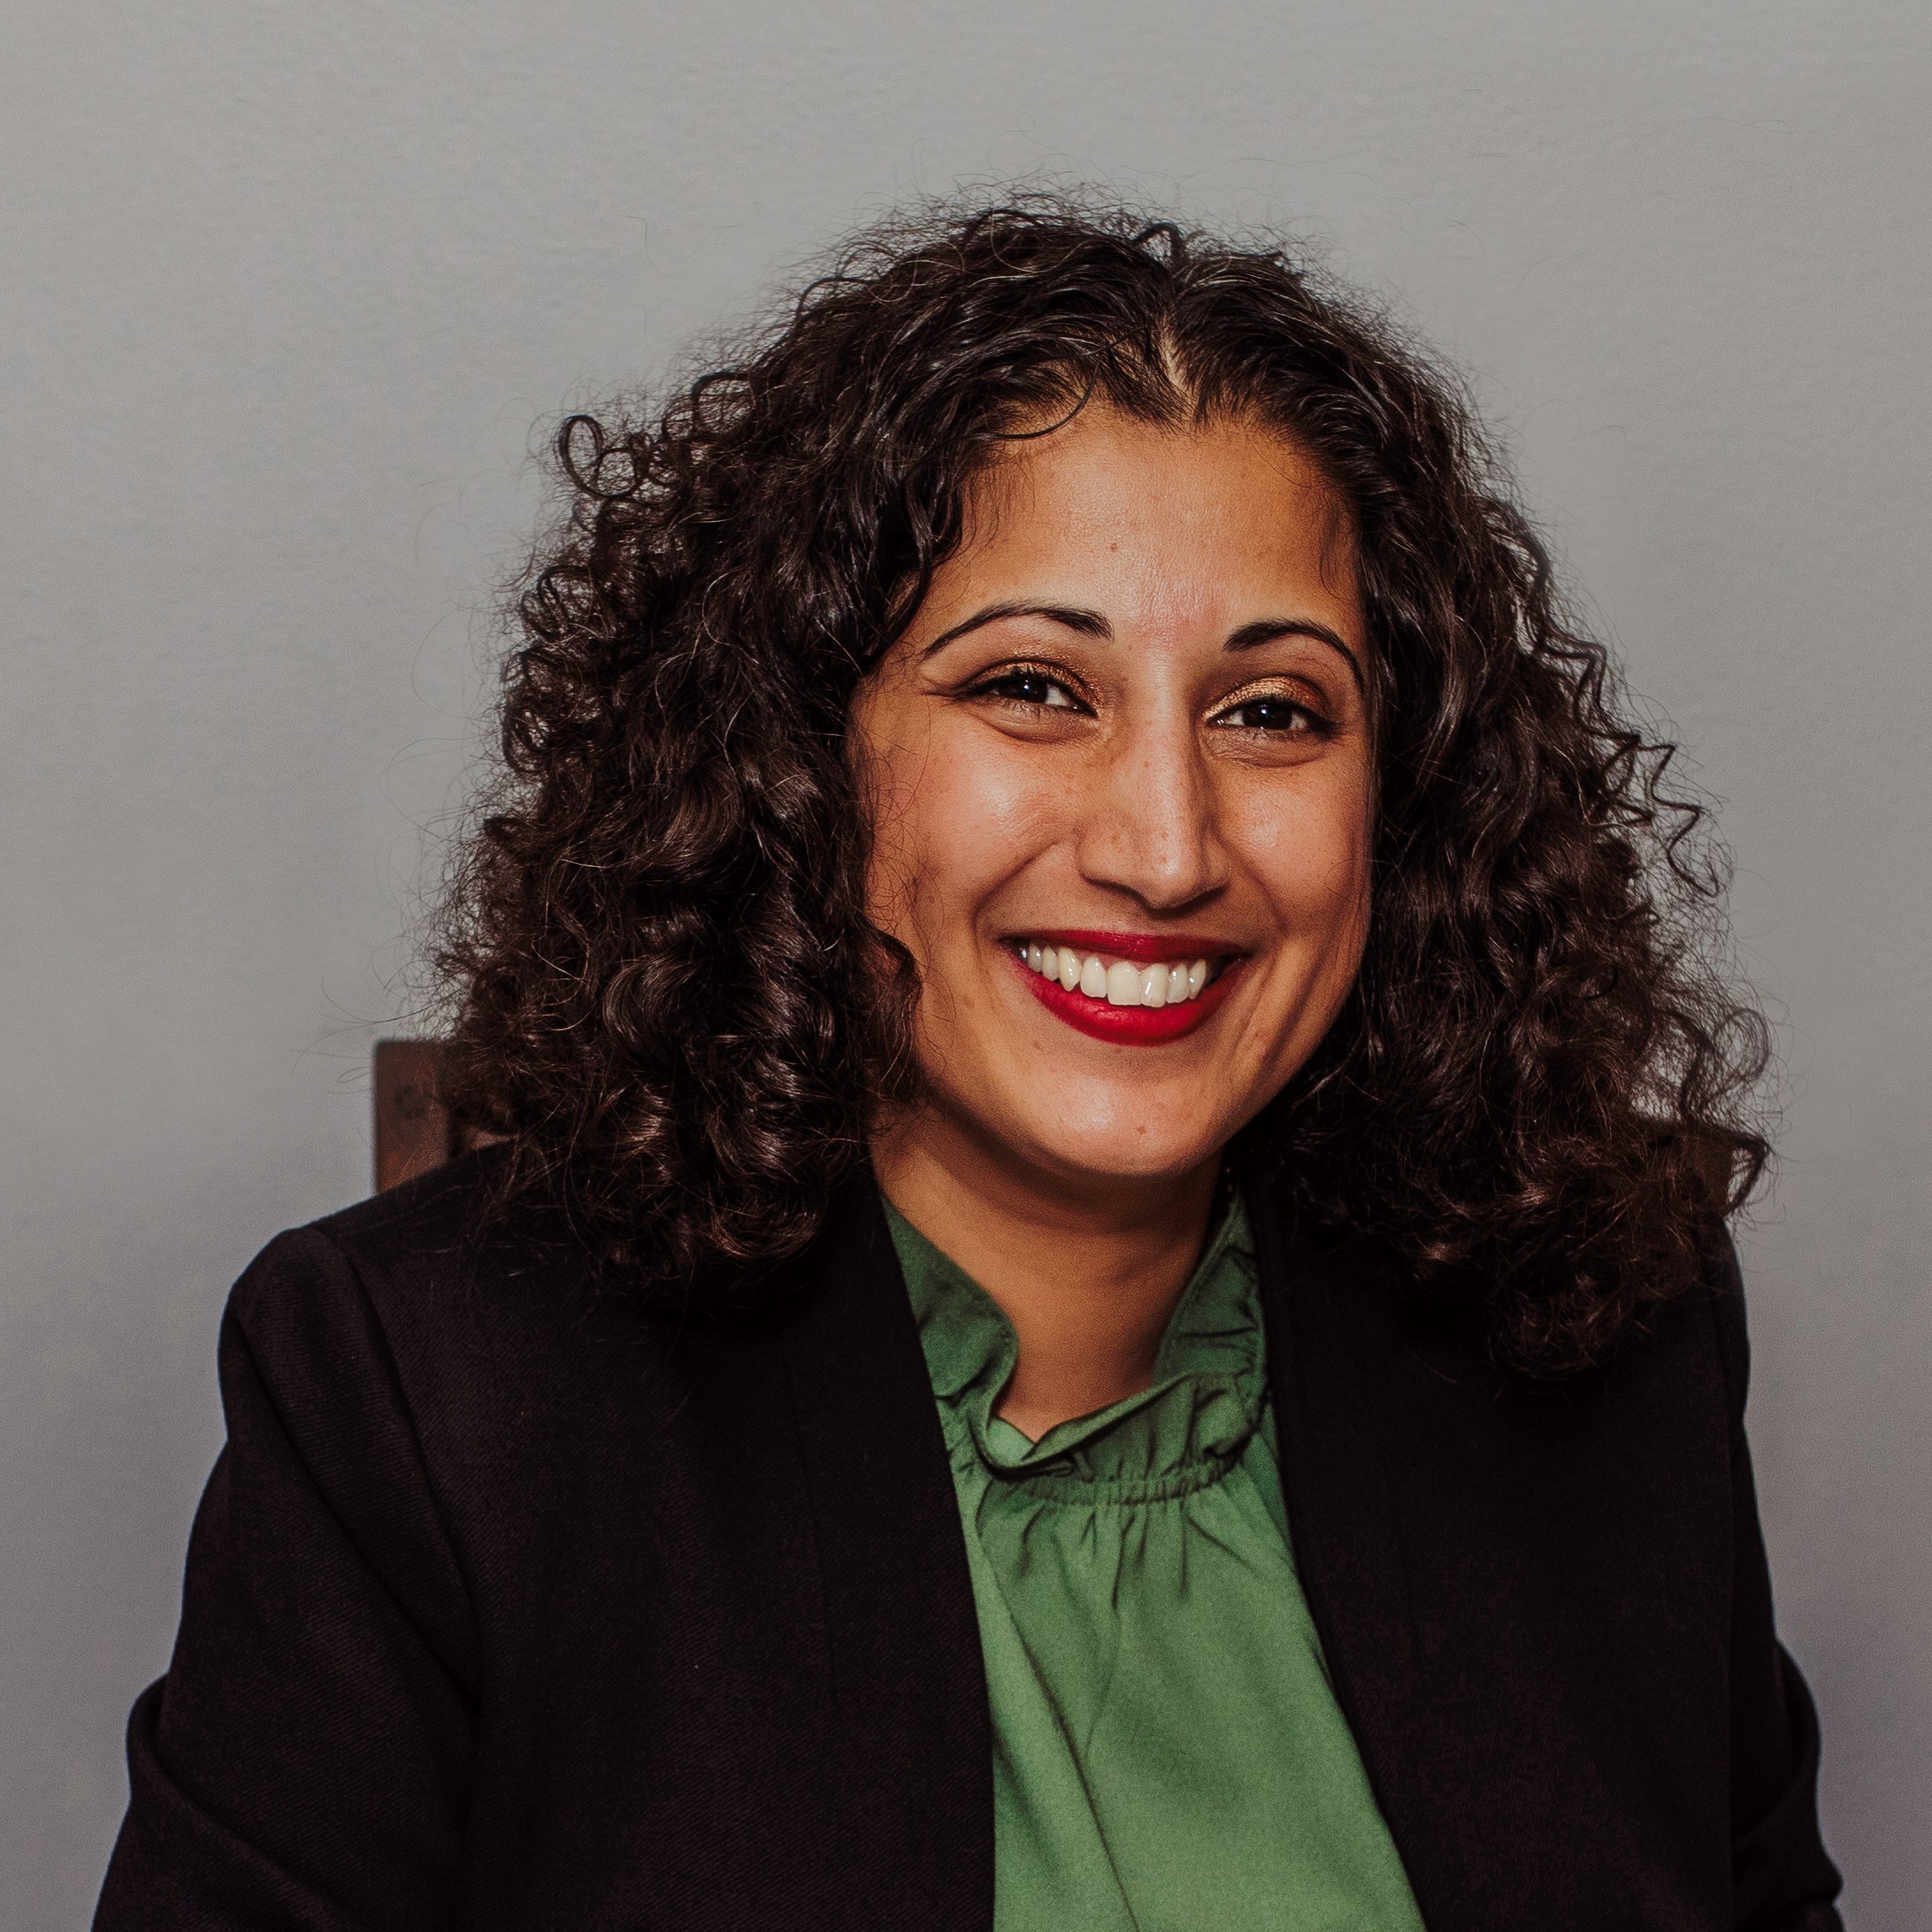 Nidhi Kashyap Announces Candidacy For Milwaukee County Circuit Court Judge